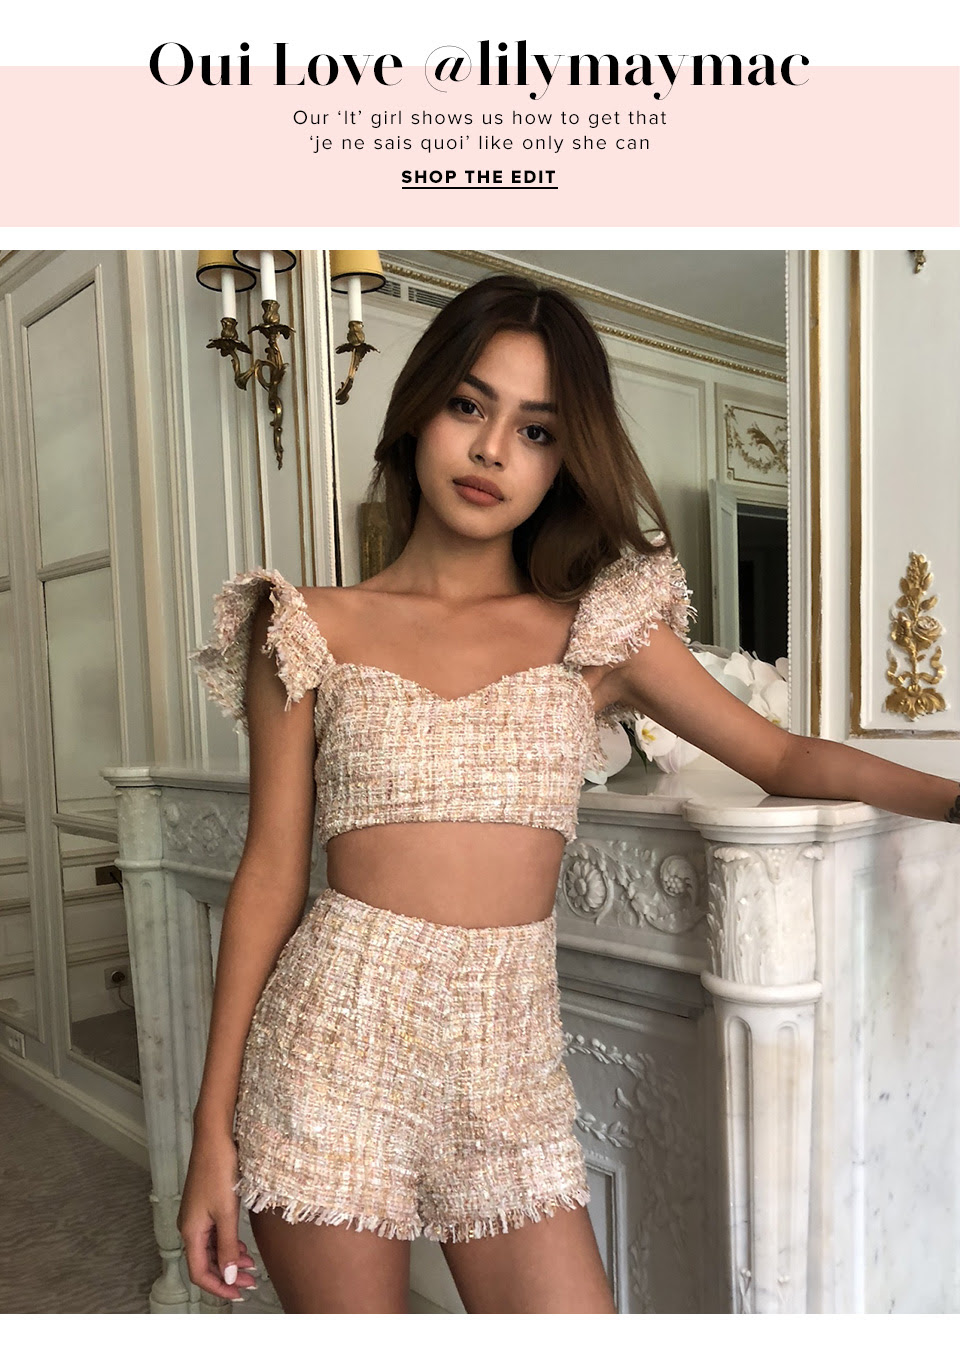 Oui Love @lilymaymac. Our ‘it’ girl shows us how to get that ‘je ne sais quoi’ like only she can. Shop The Edit.